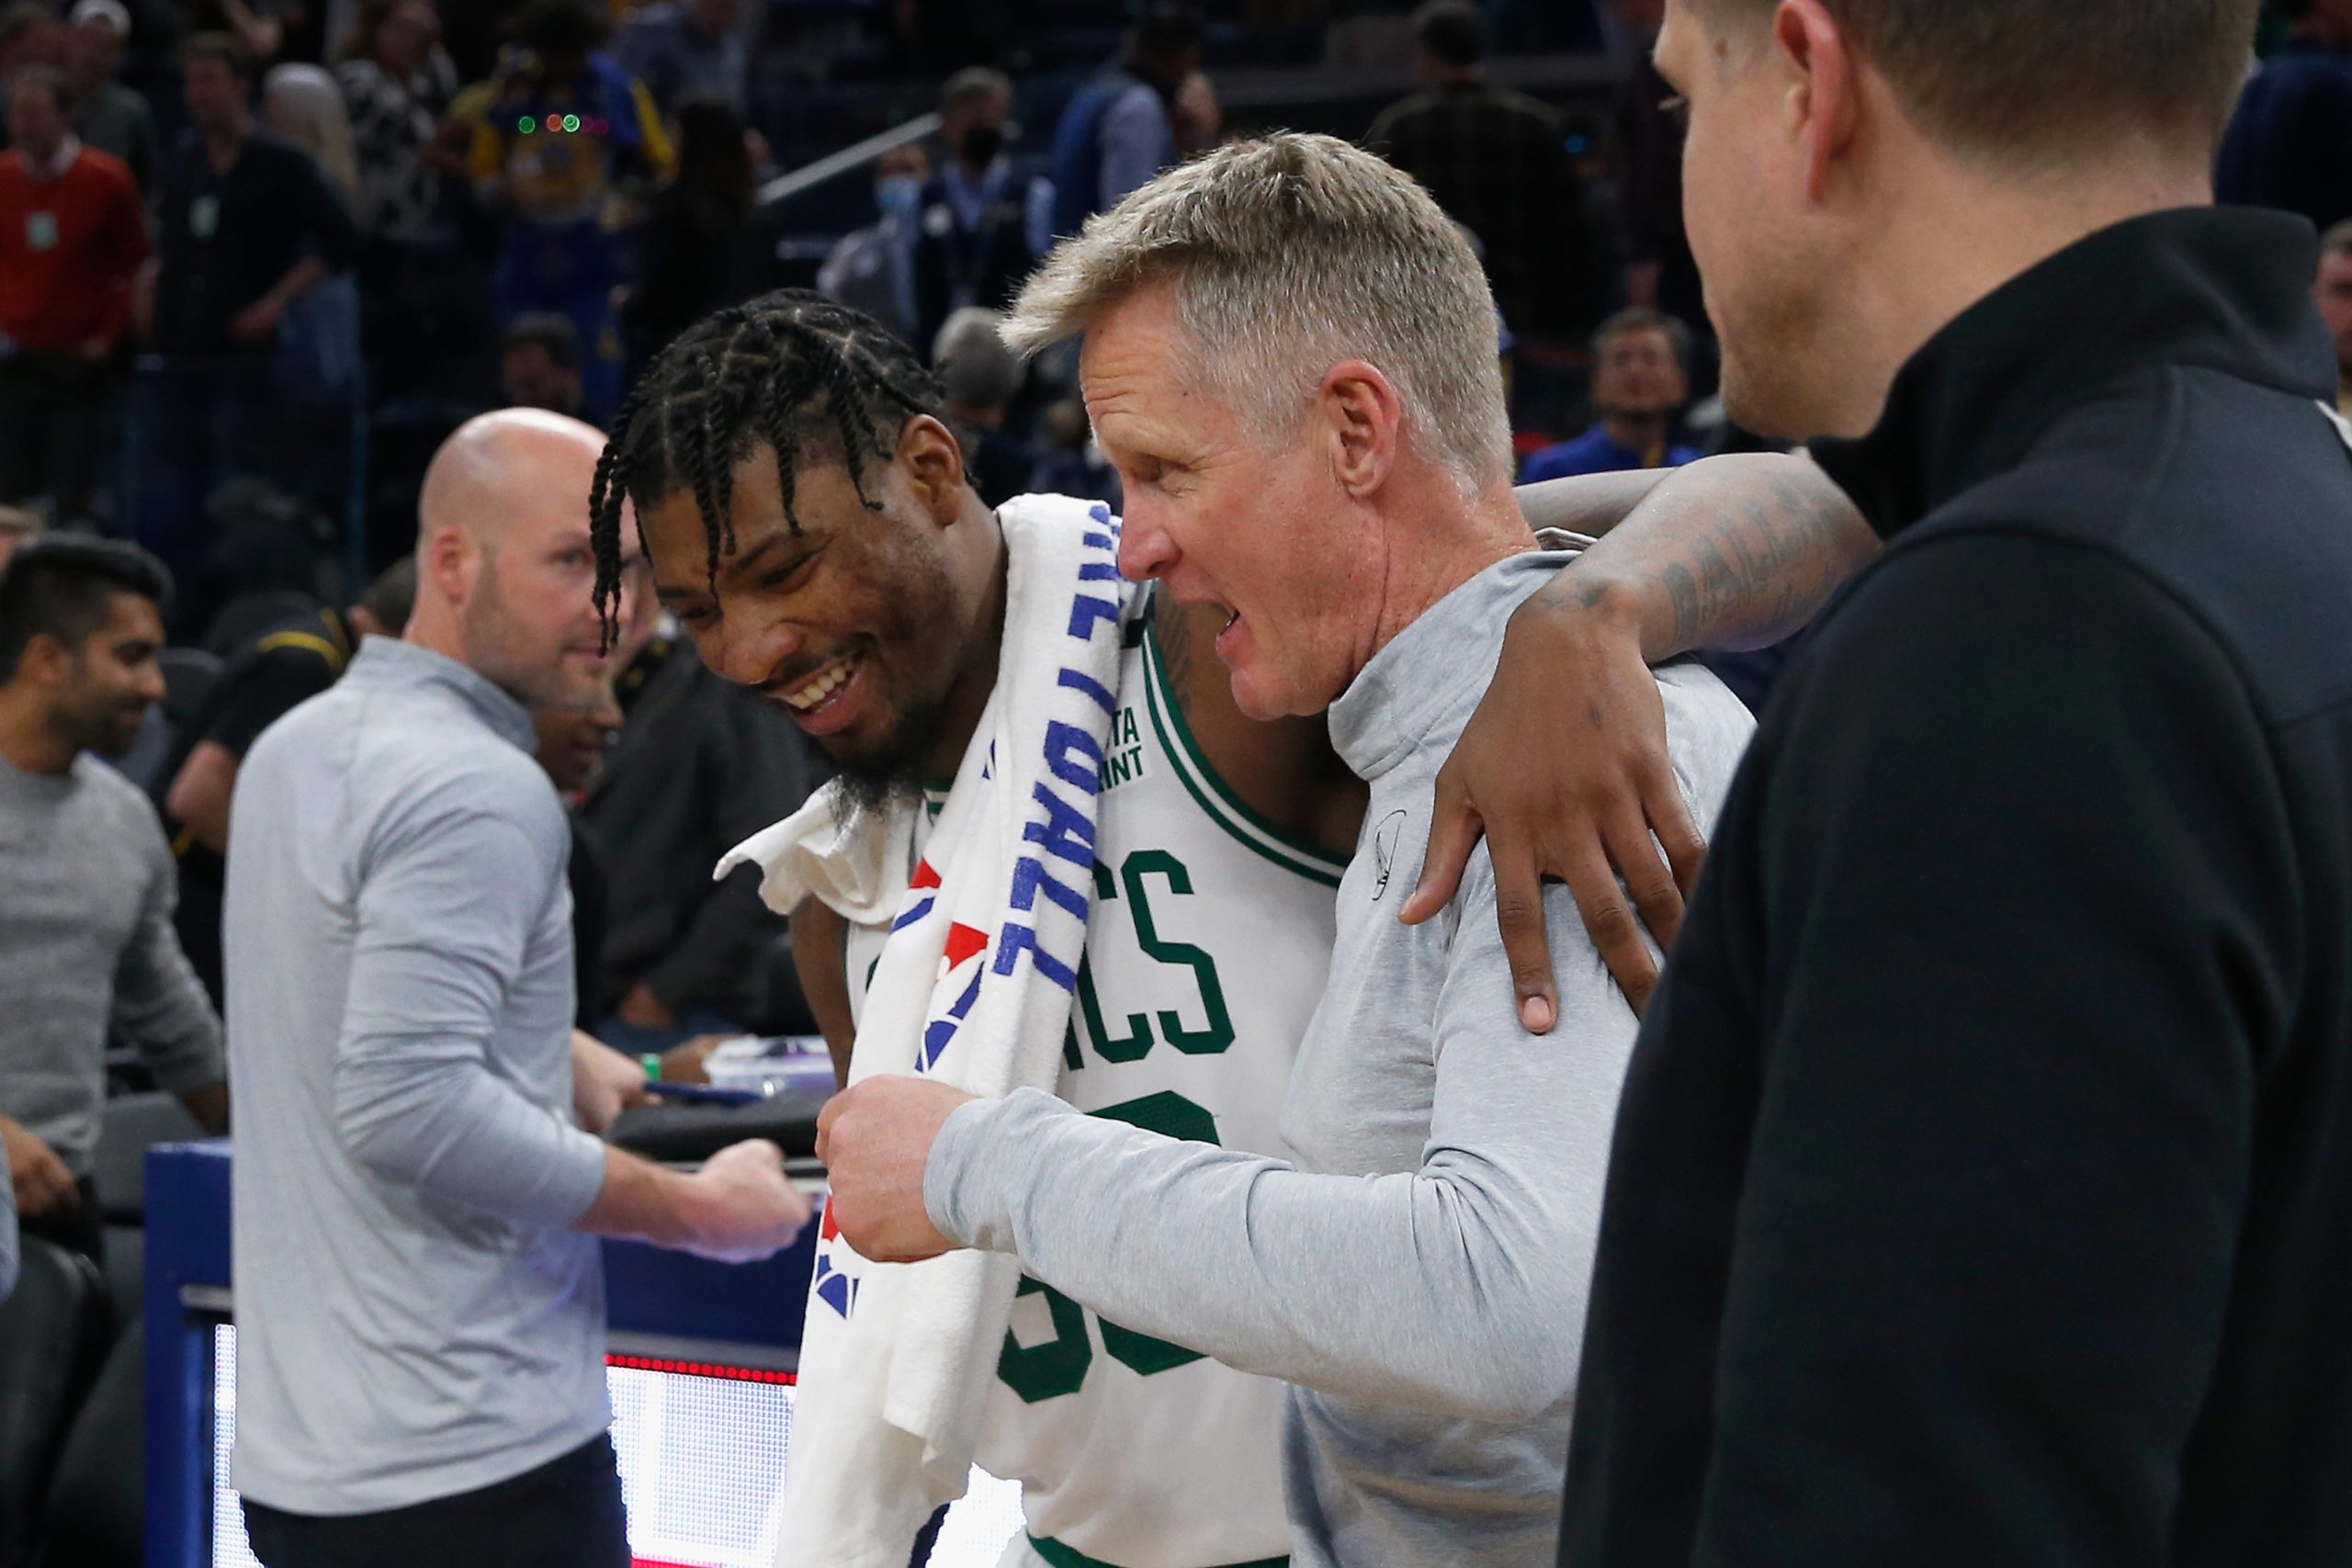 Marcus Smart of the Boston Celtics talks to head coach Steve Kerr of the Golden State Warriors after their game.